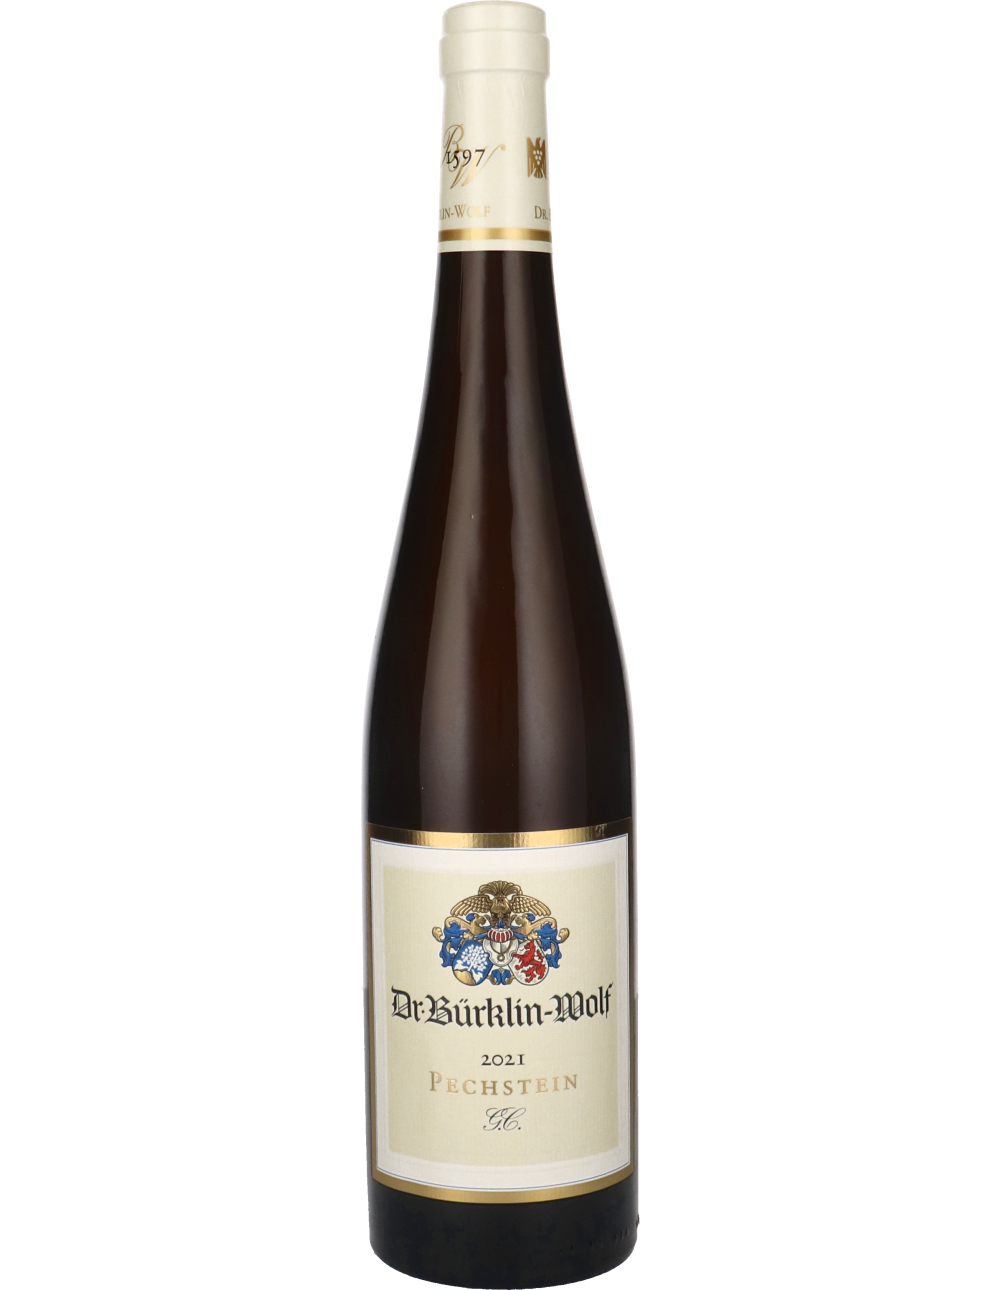 Forster Pechstein Riesling Edition G.C.